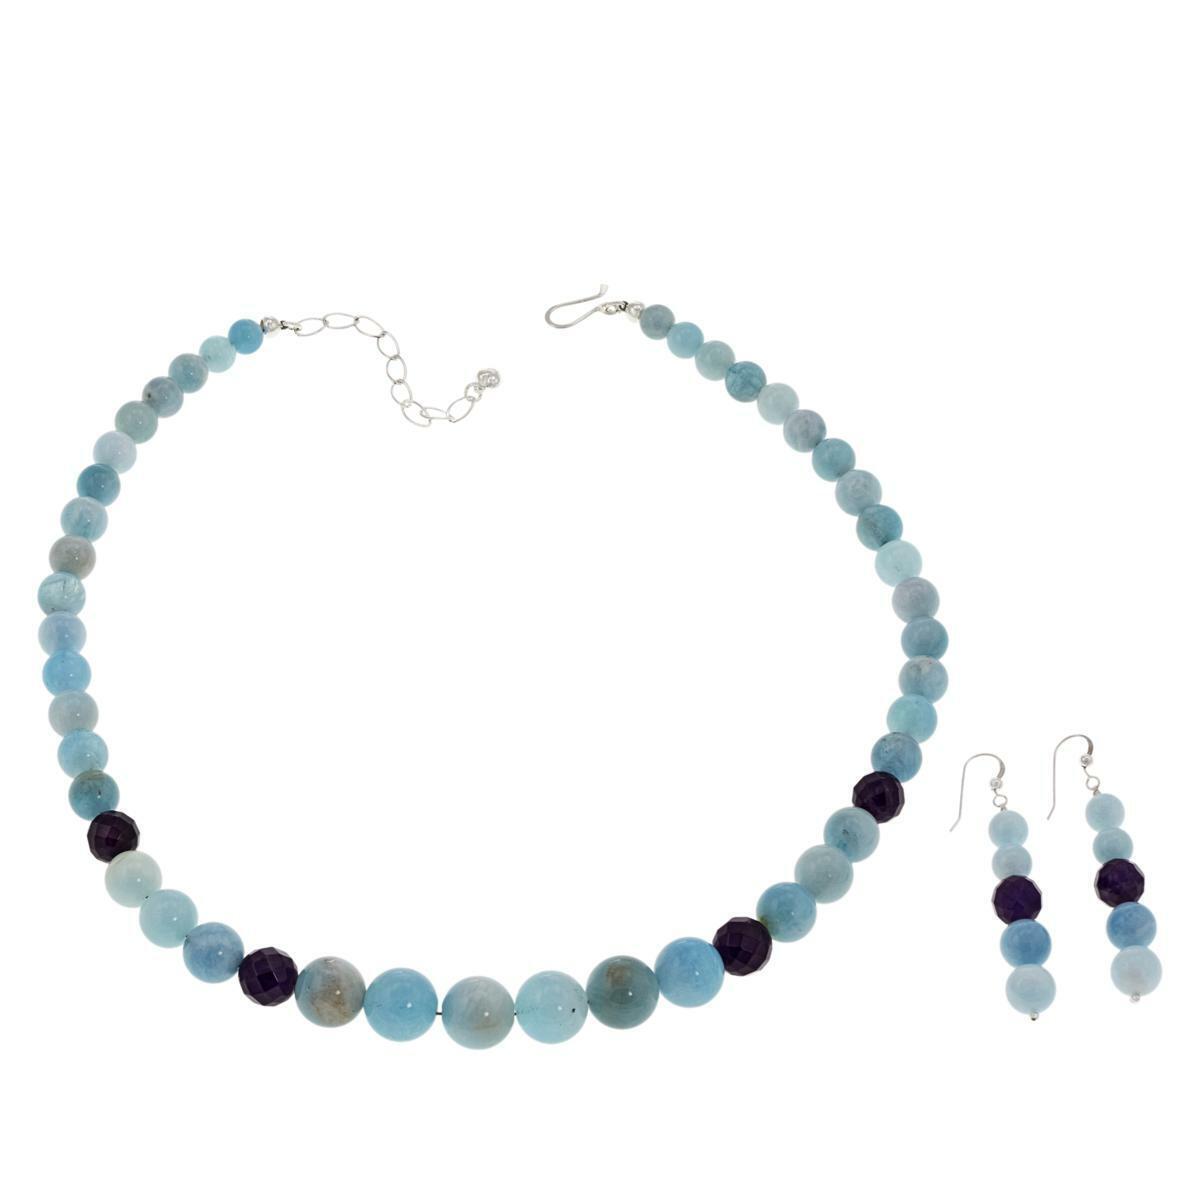 Jay King Aquamarine and Amethyst Bead Necklace and Earring Set